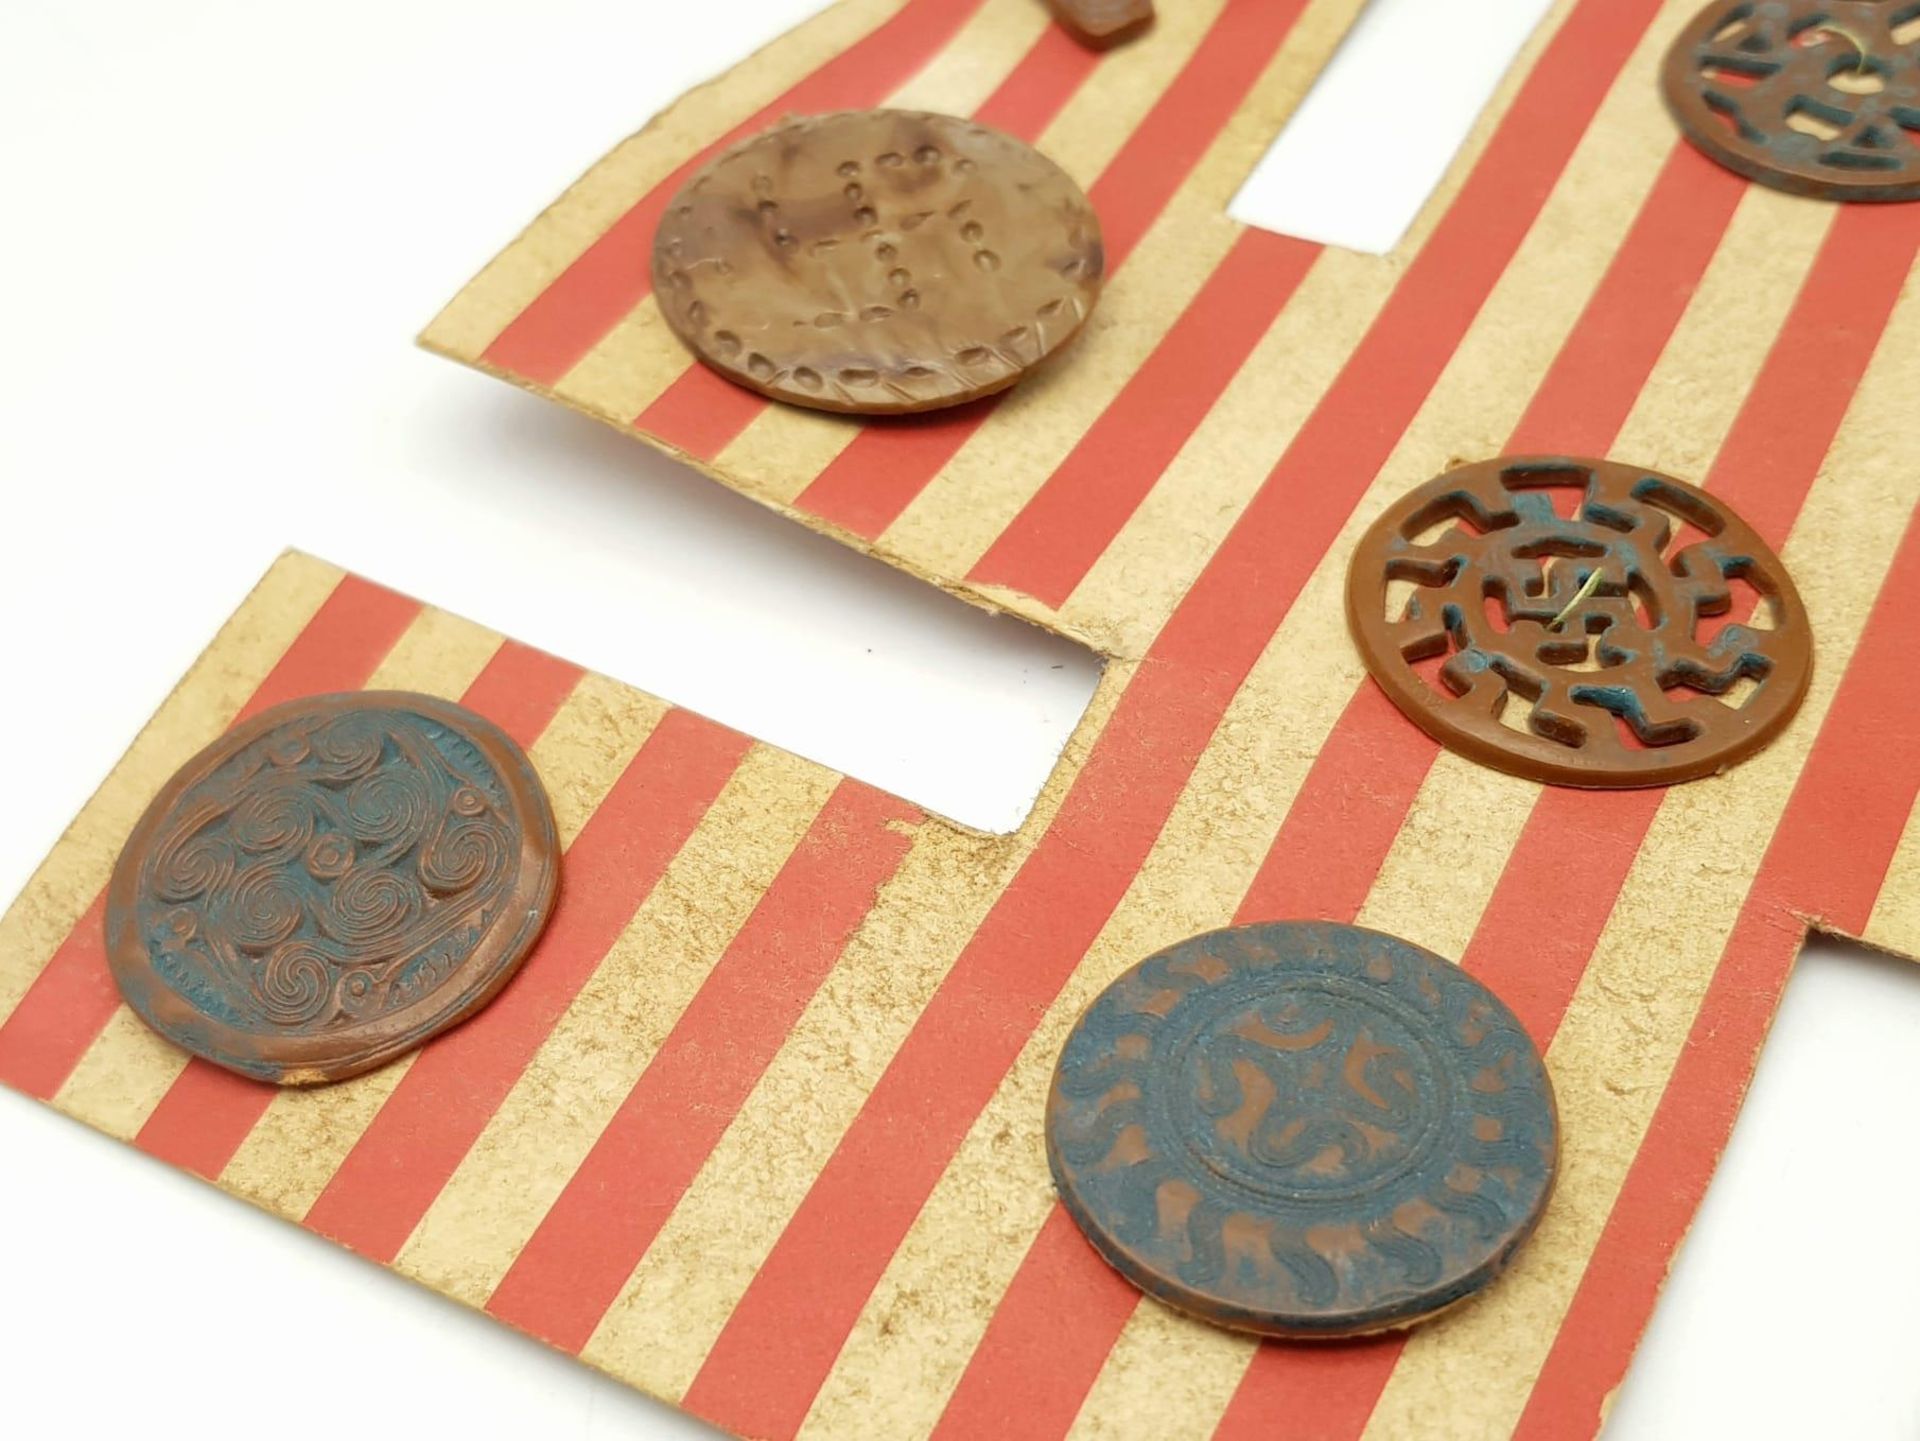 3rd Reich Archaeology Set of Winterhilf Tinnie Badges. The set of 9 badges are a portrayal of pre- - Bild 3 aus 5